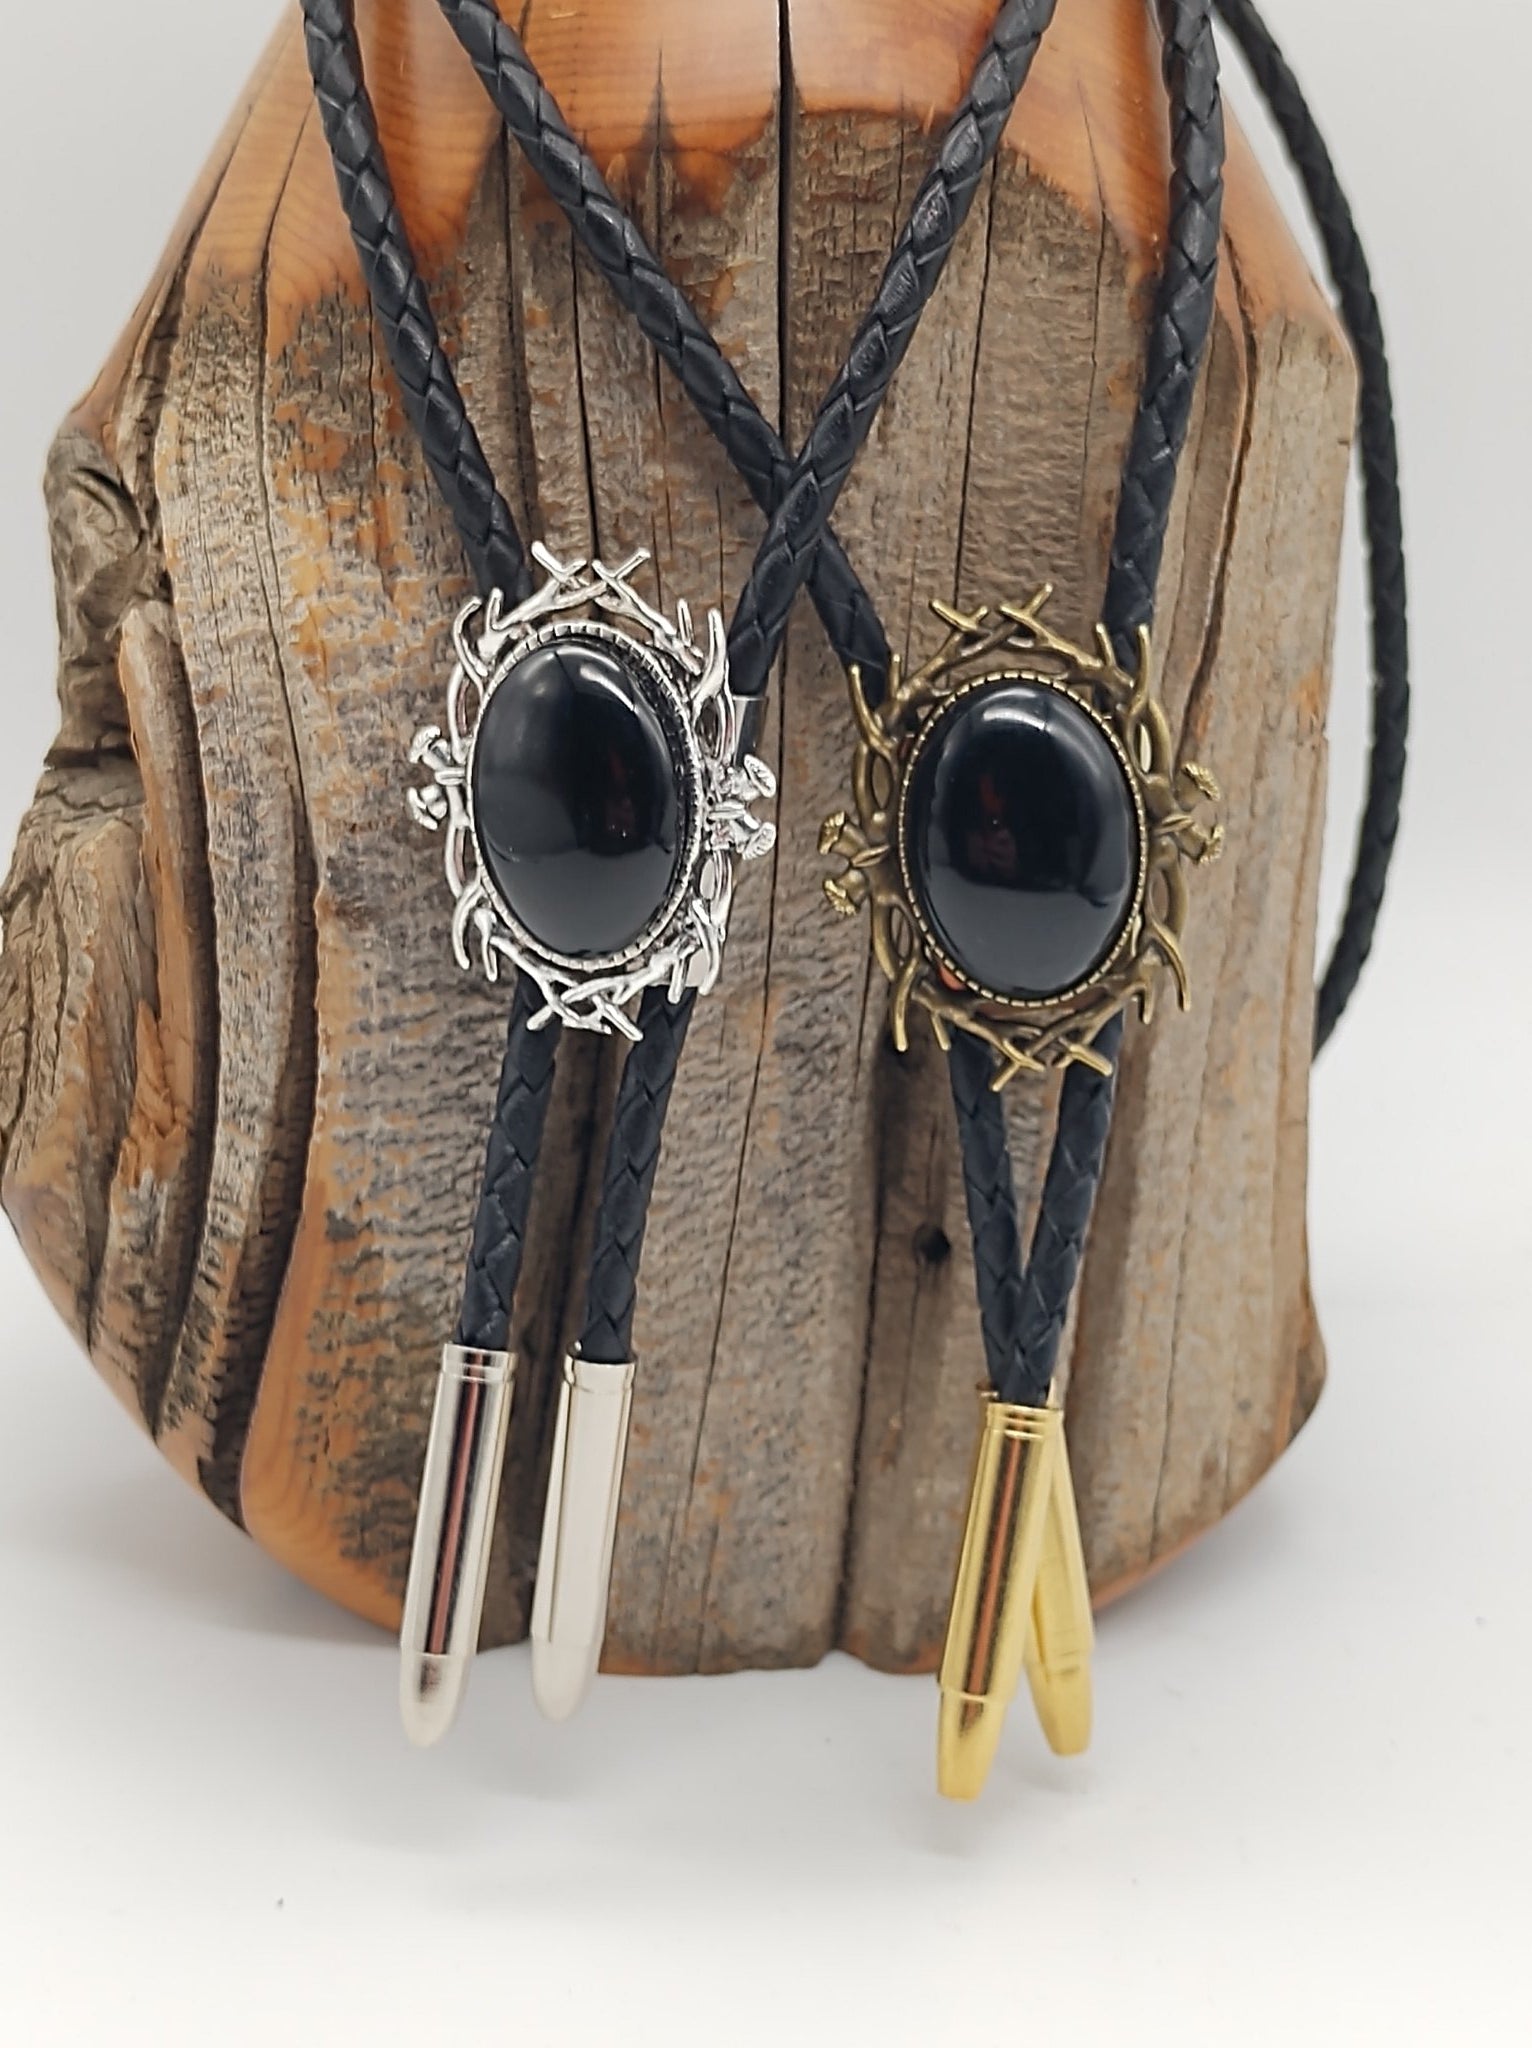 Stag Horn Bolo Tie with Black Onyx in Silver or Gold - Folks On The Edge